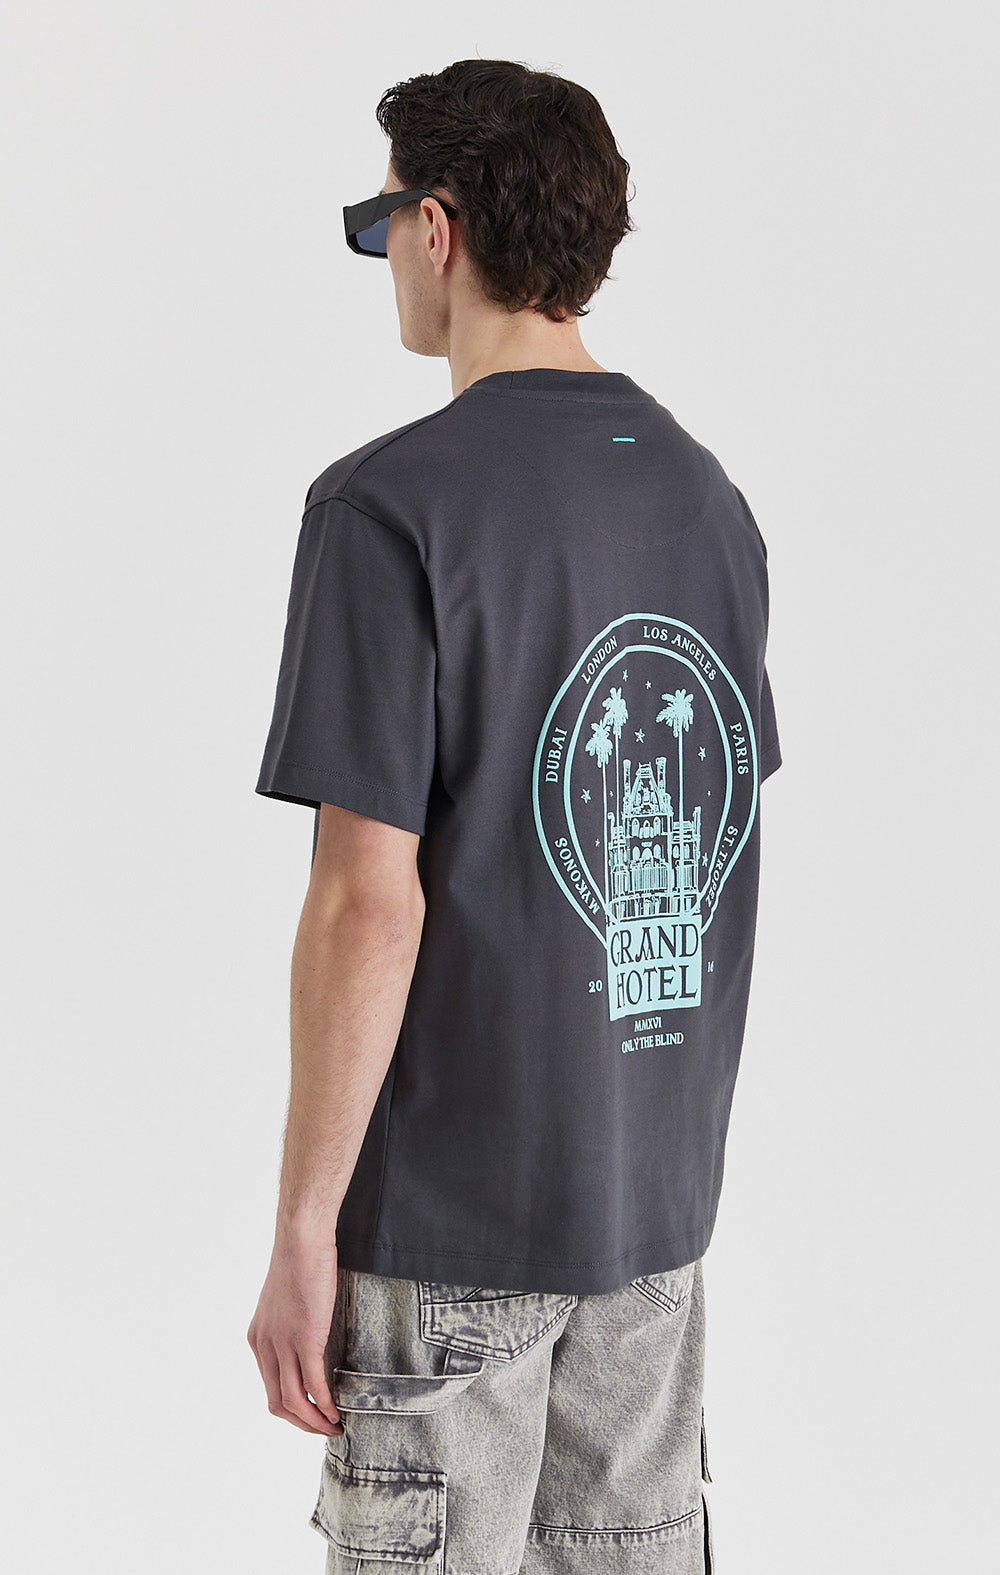 The Grand Hotel T-Shirt